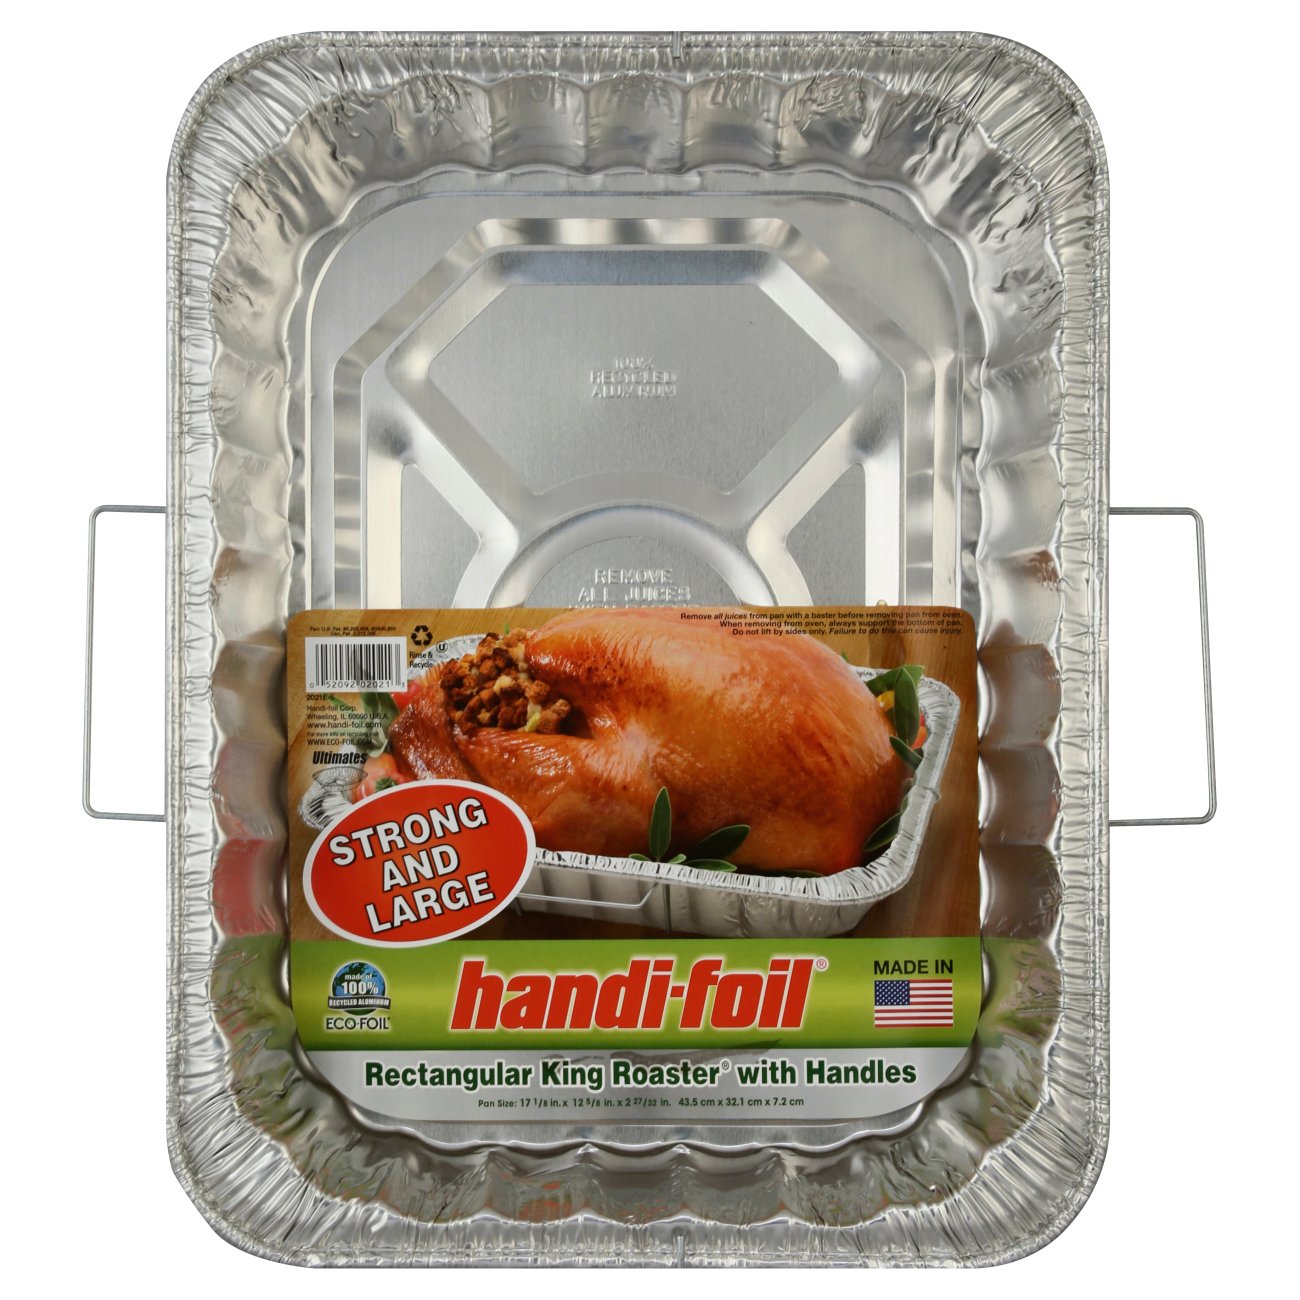 Handi-foil Super King Square Cake Pan with Handle Lid, 2 Piece